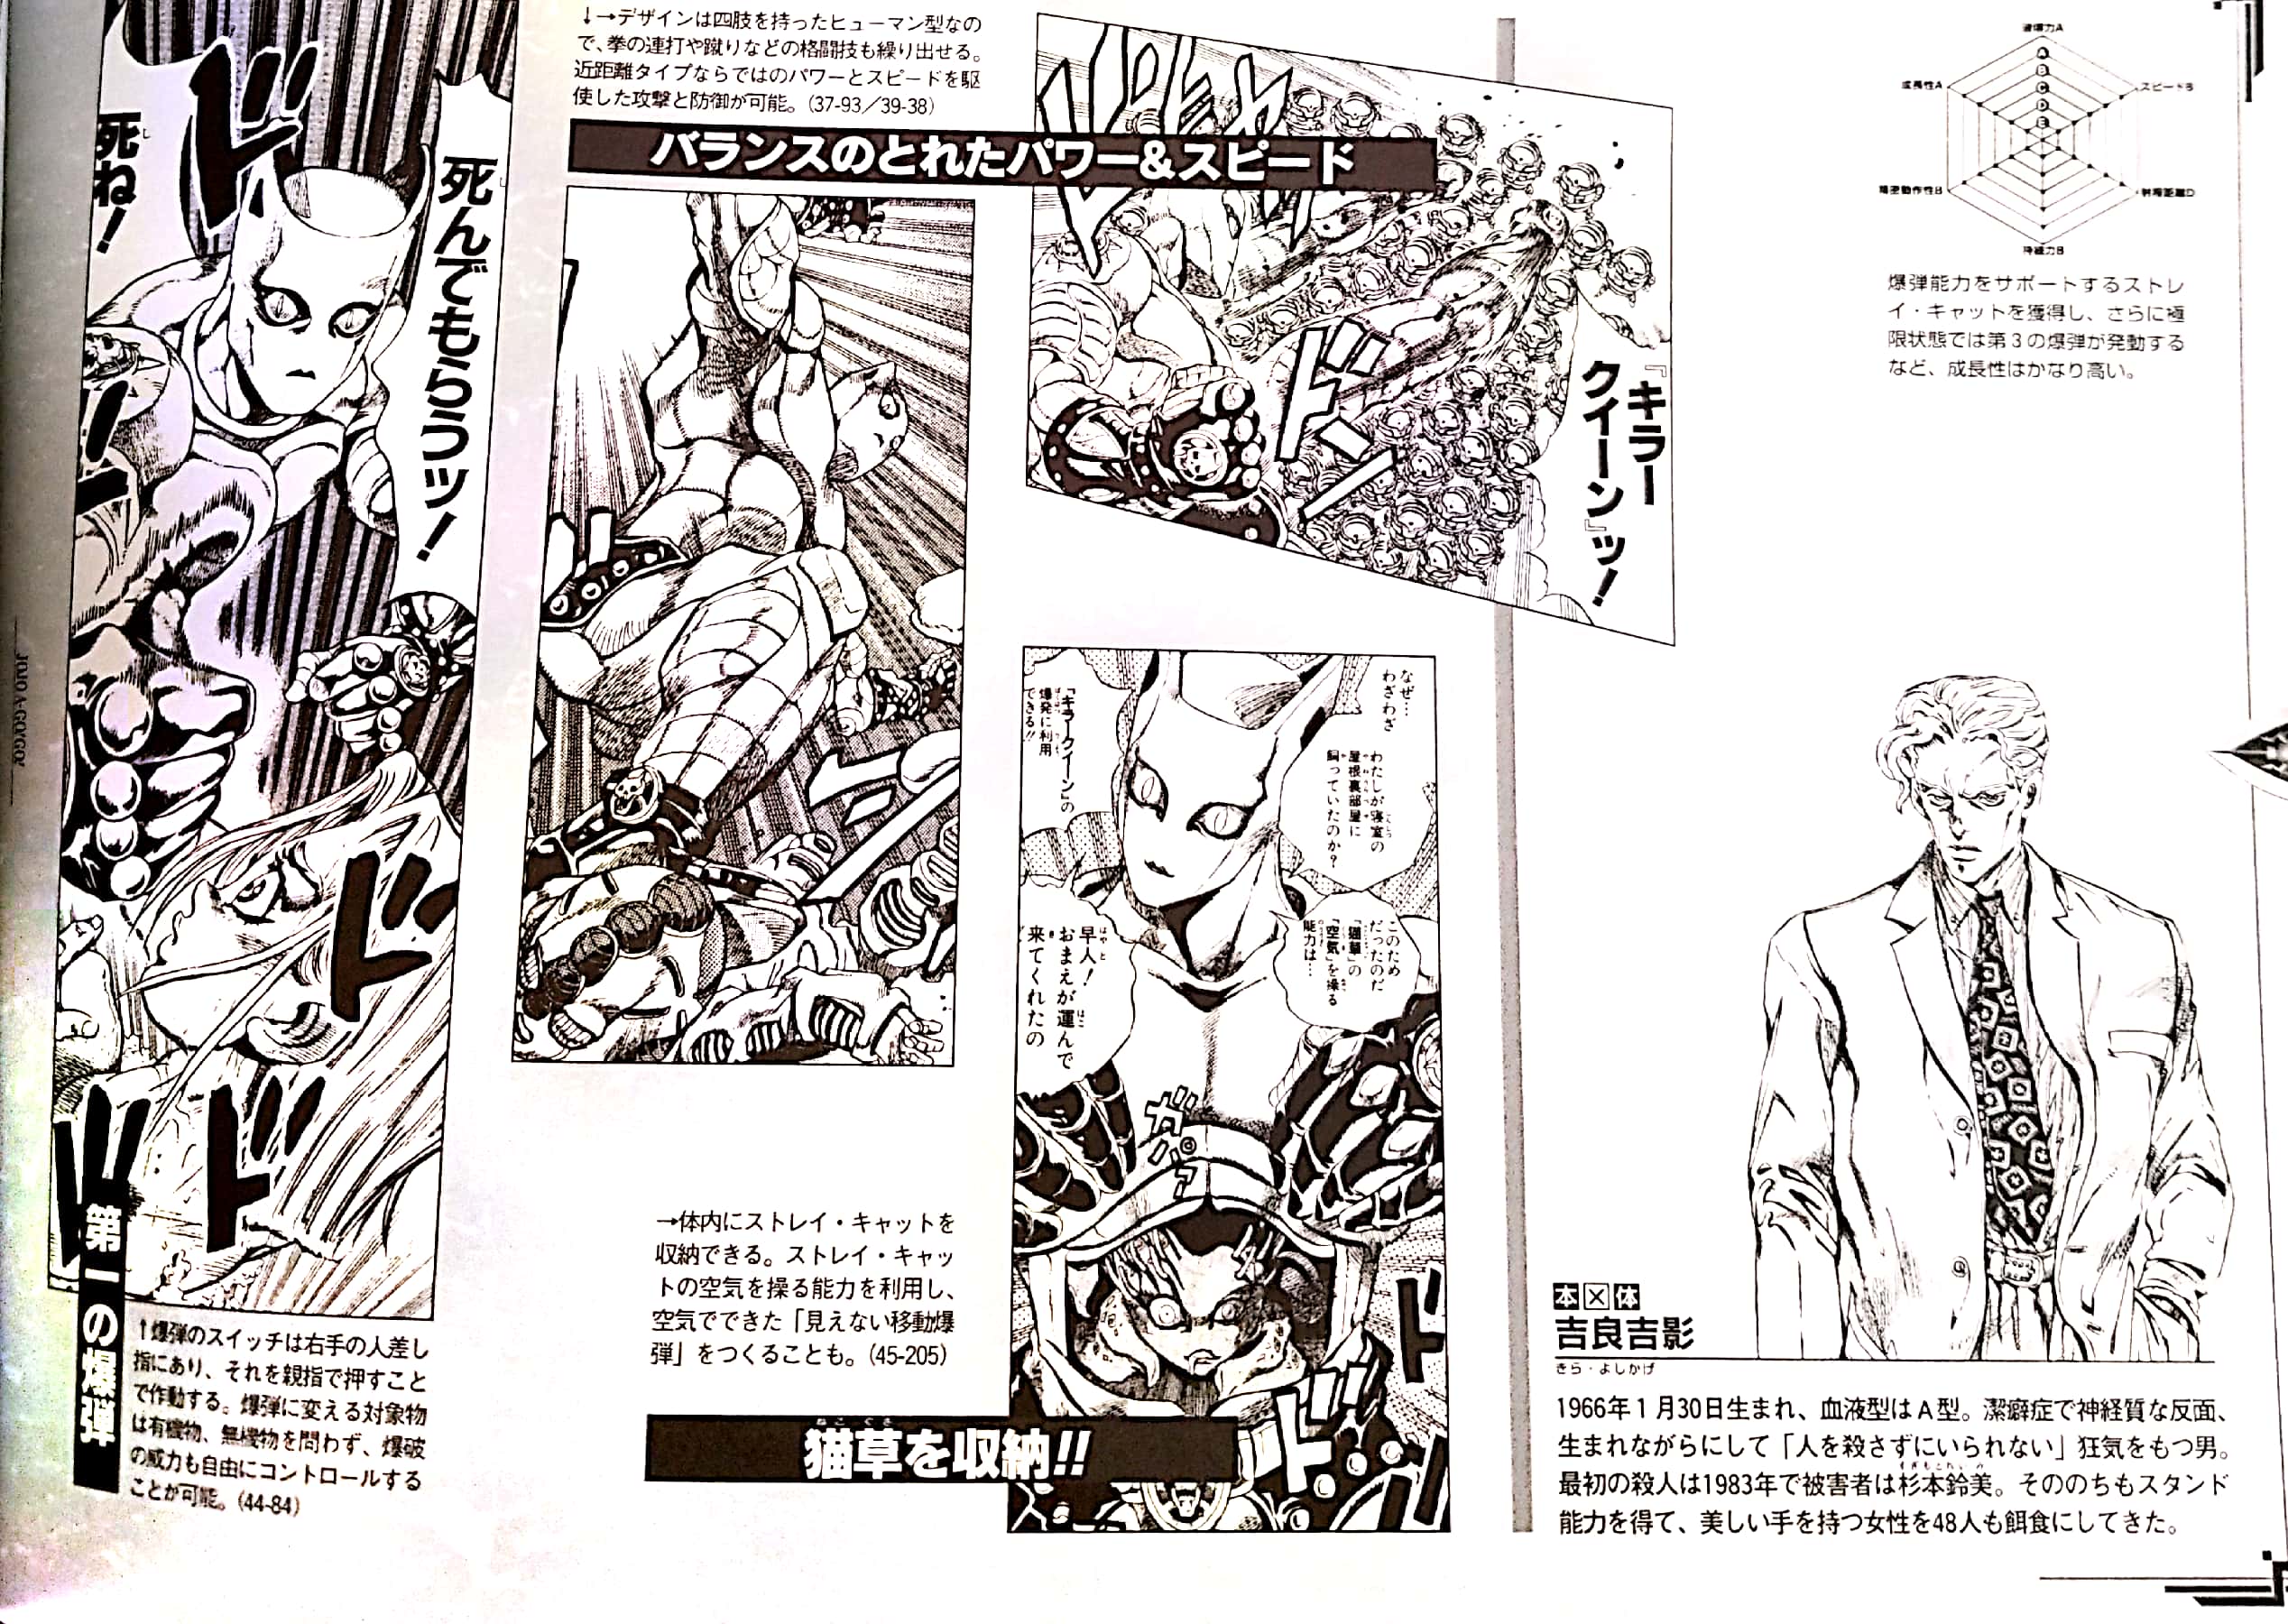 Guys I Did It I Translated Killer Queen S And Creams Pages From Jojo A Go Go Japanese To English Fandom